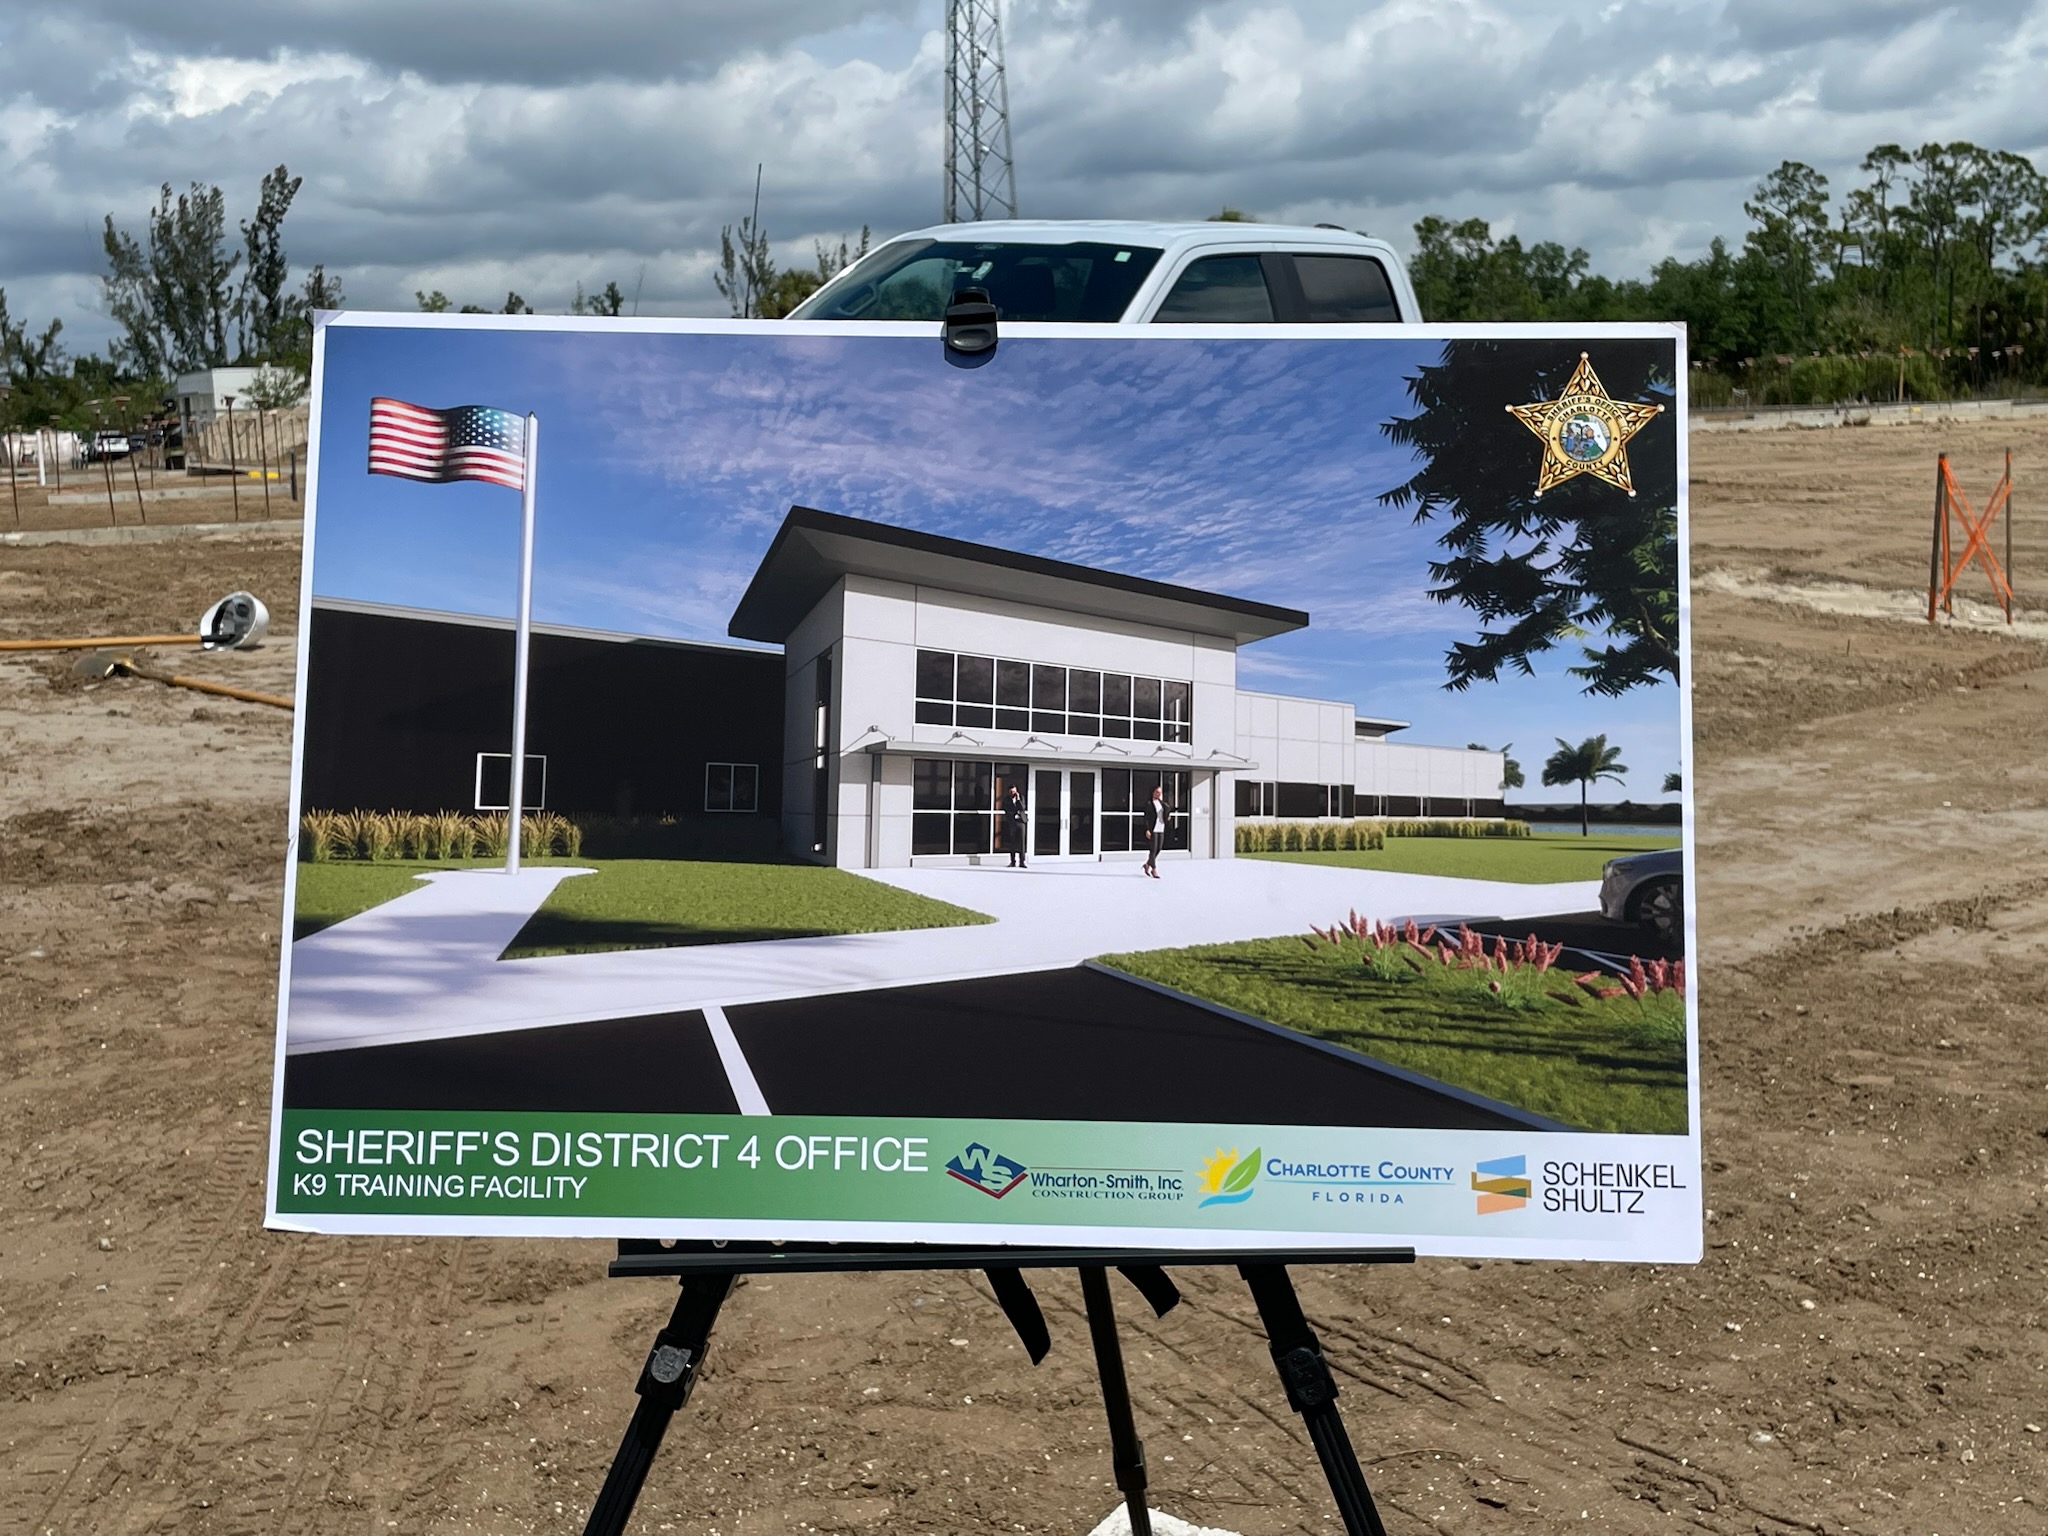 Charlotte County Sheriff's Office broke ground on a new District 4 office.